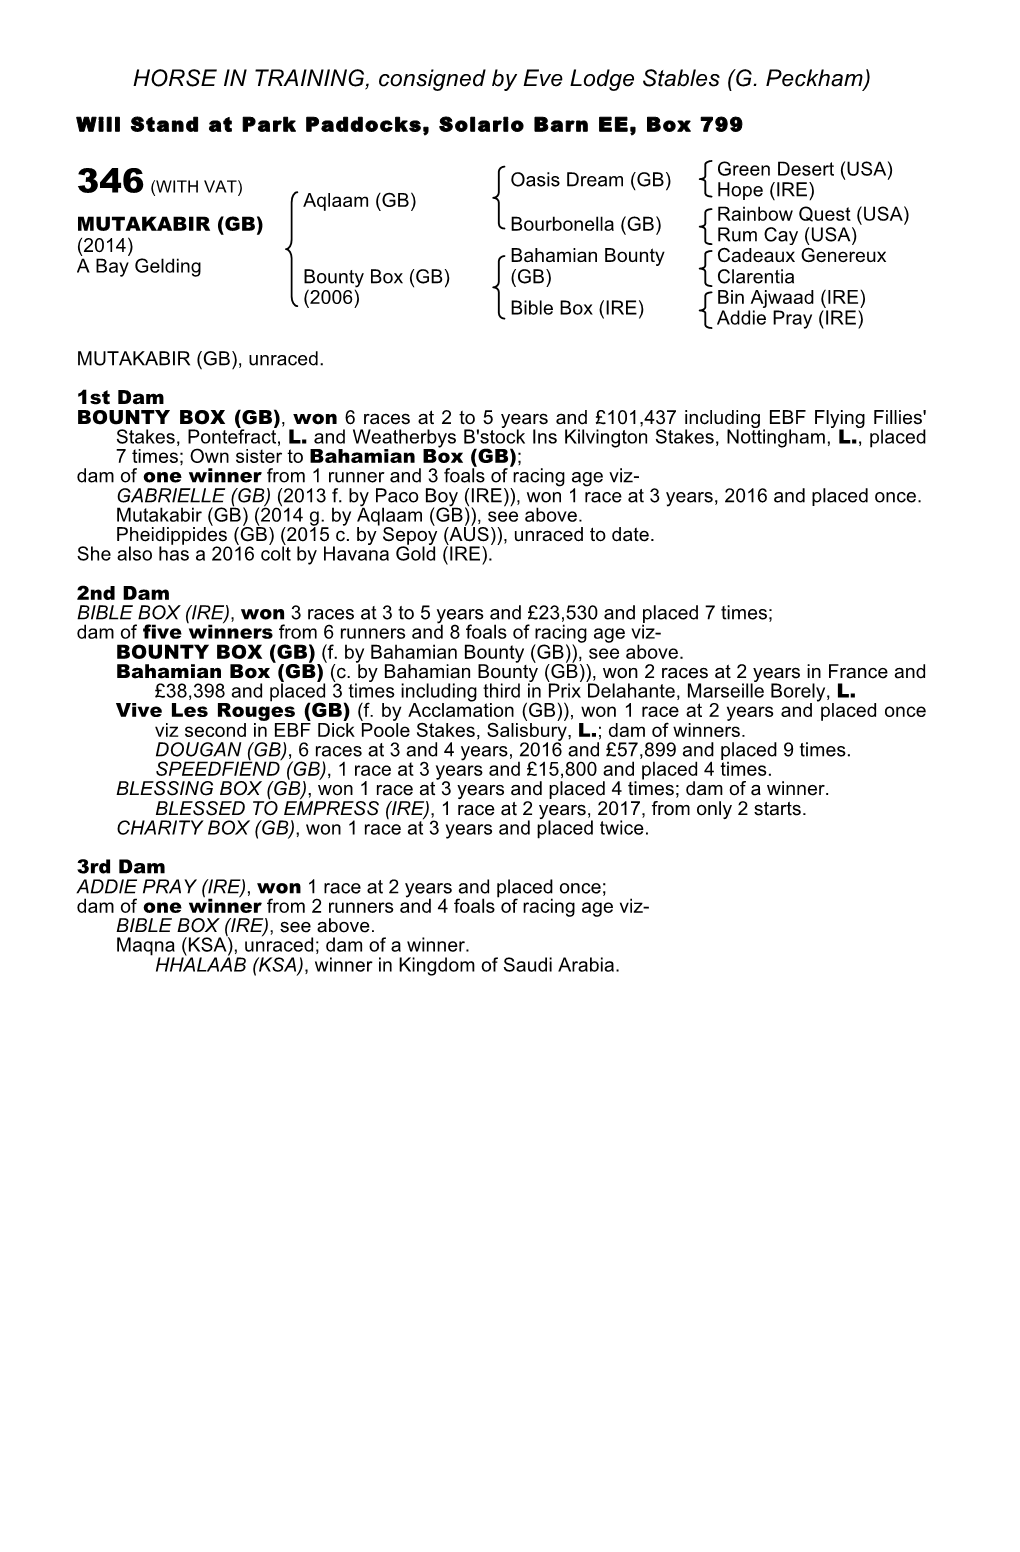 HORSE in TRAINING, Consigned by Eve Lodge Stables (G